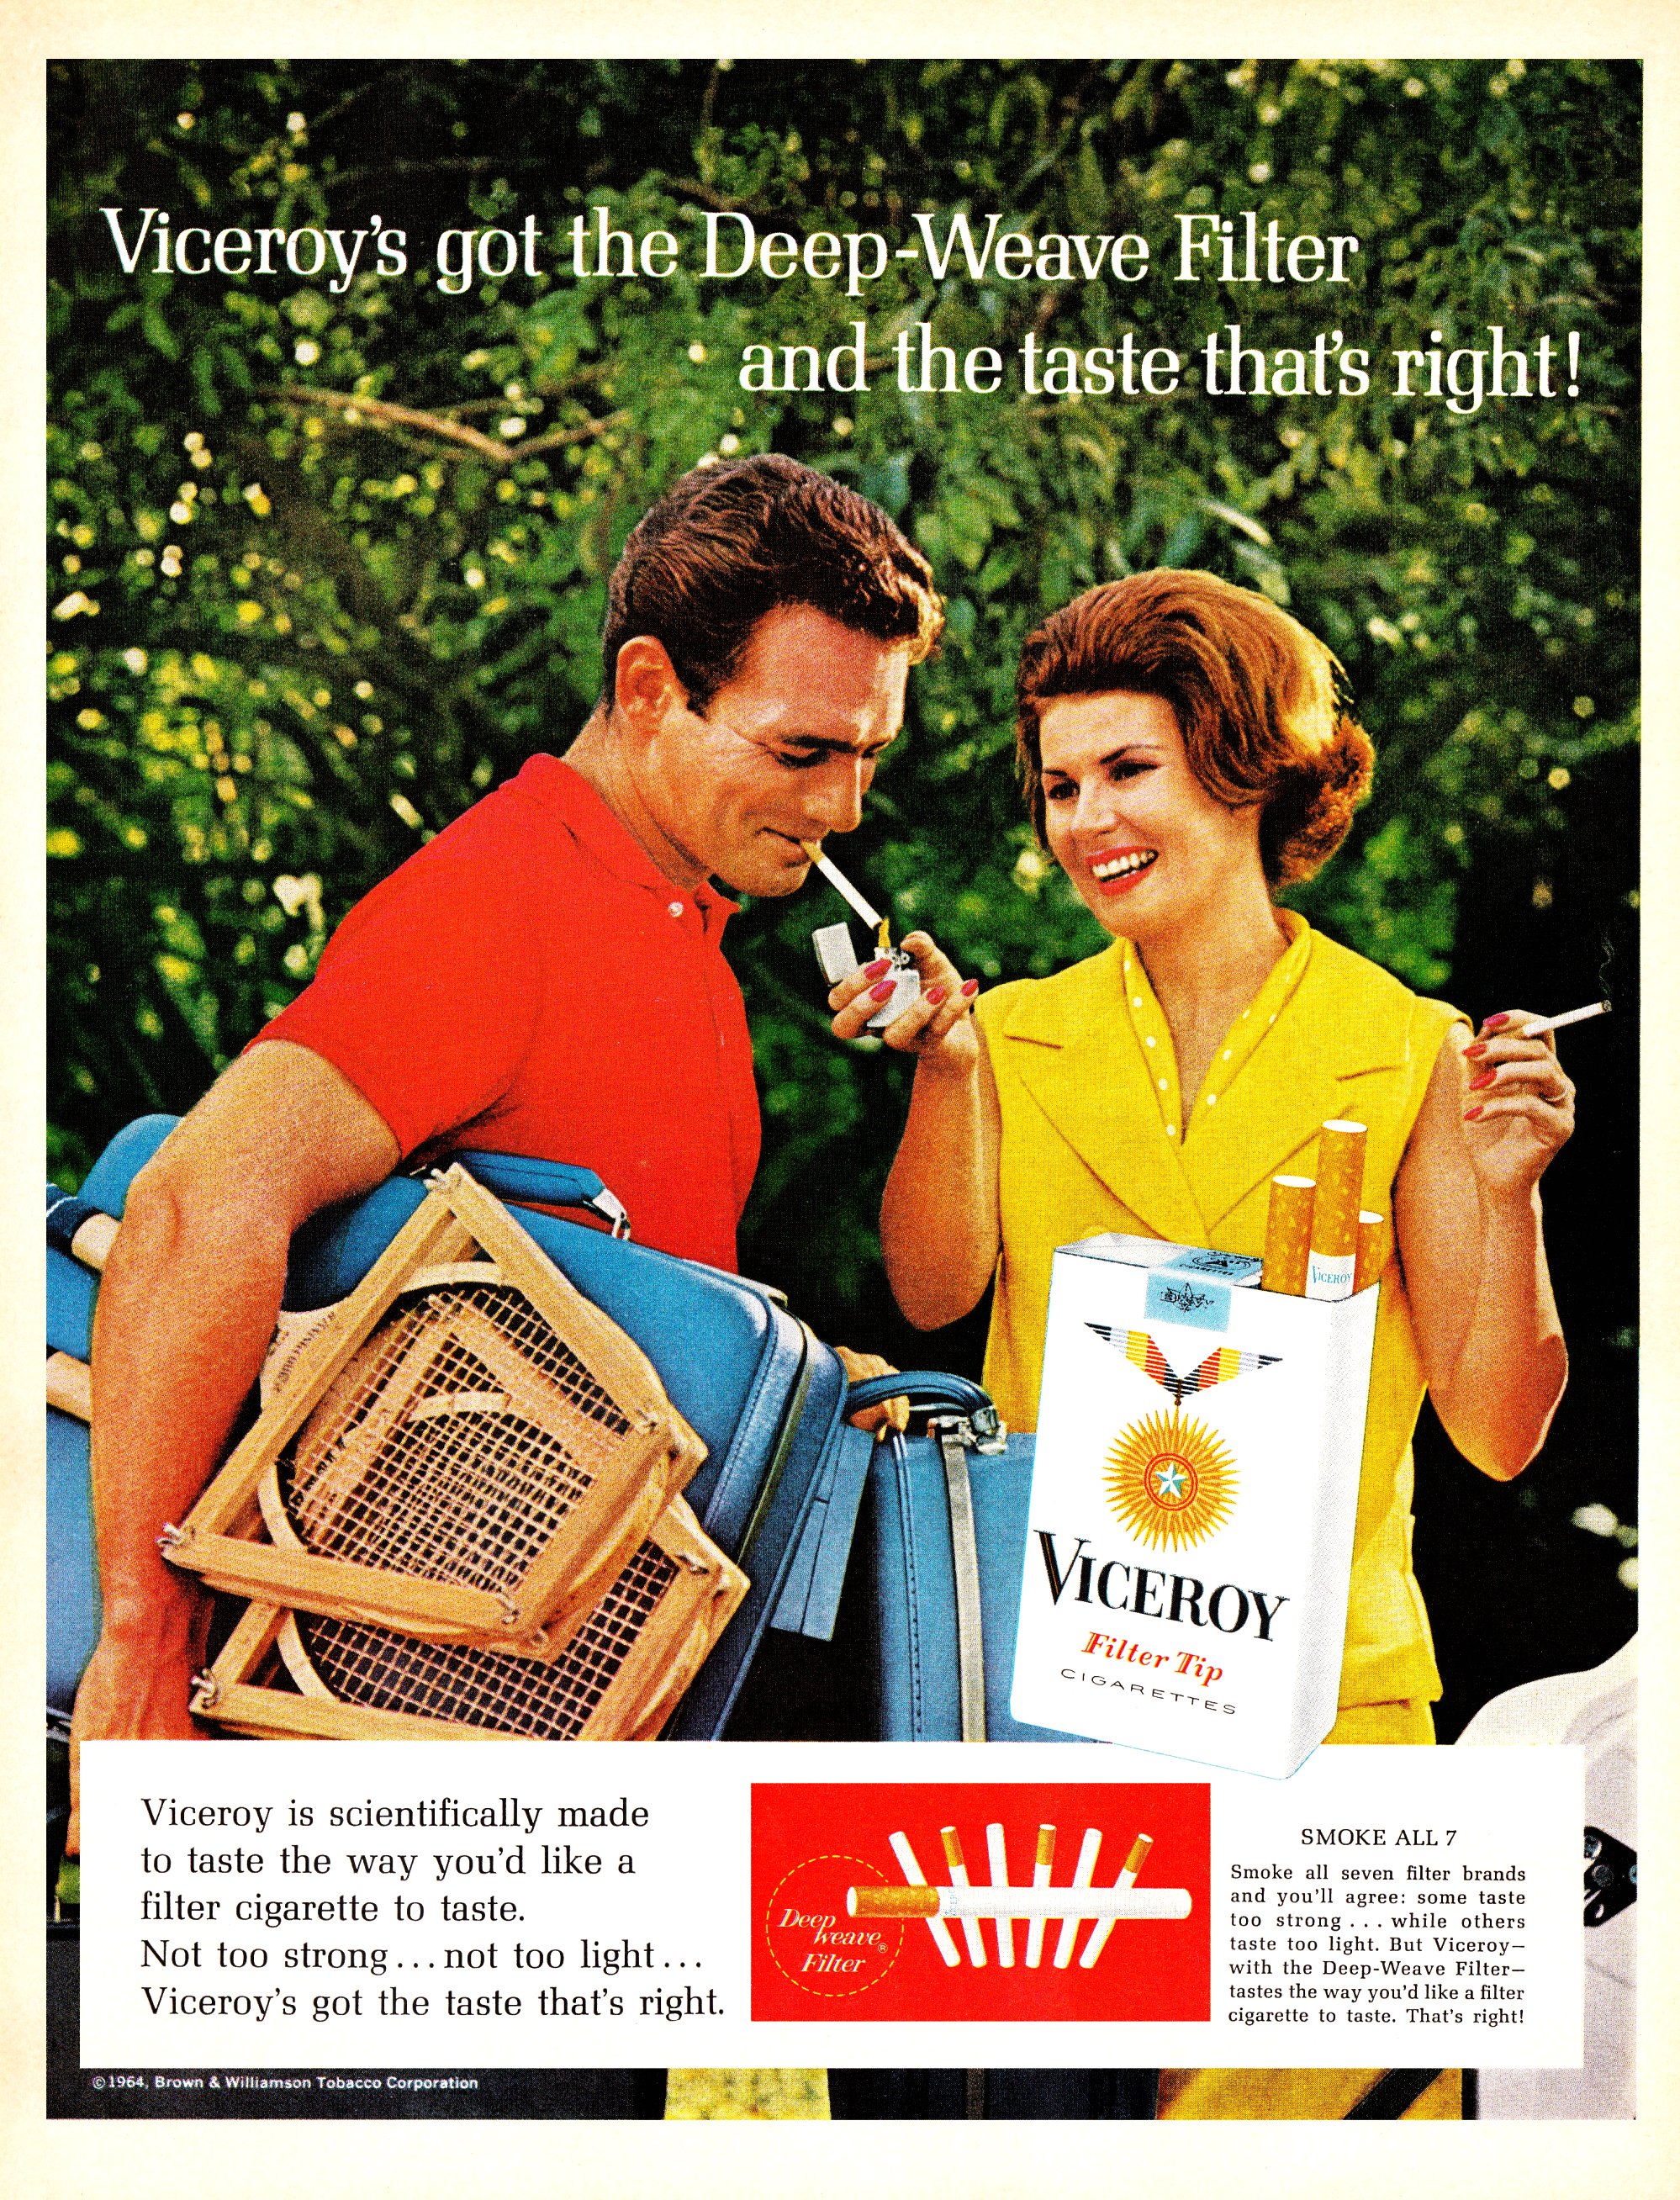 Viceroy - published in Life - June 19, 1964